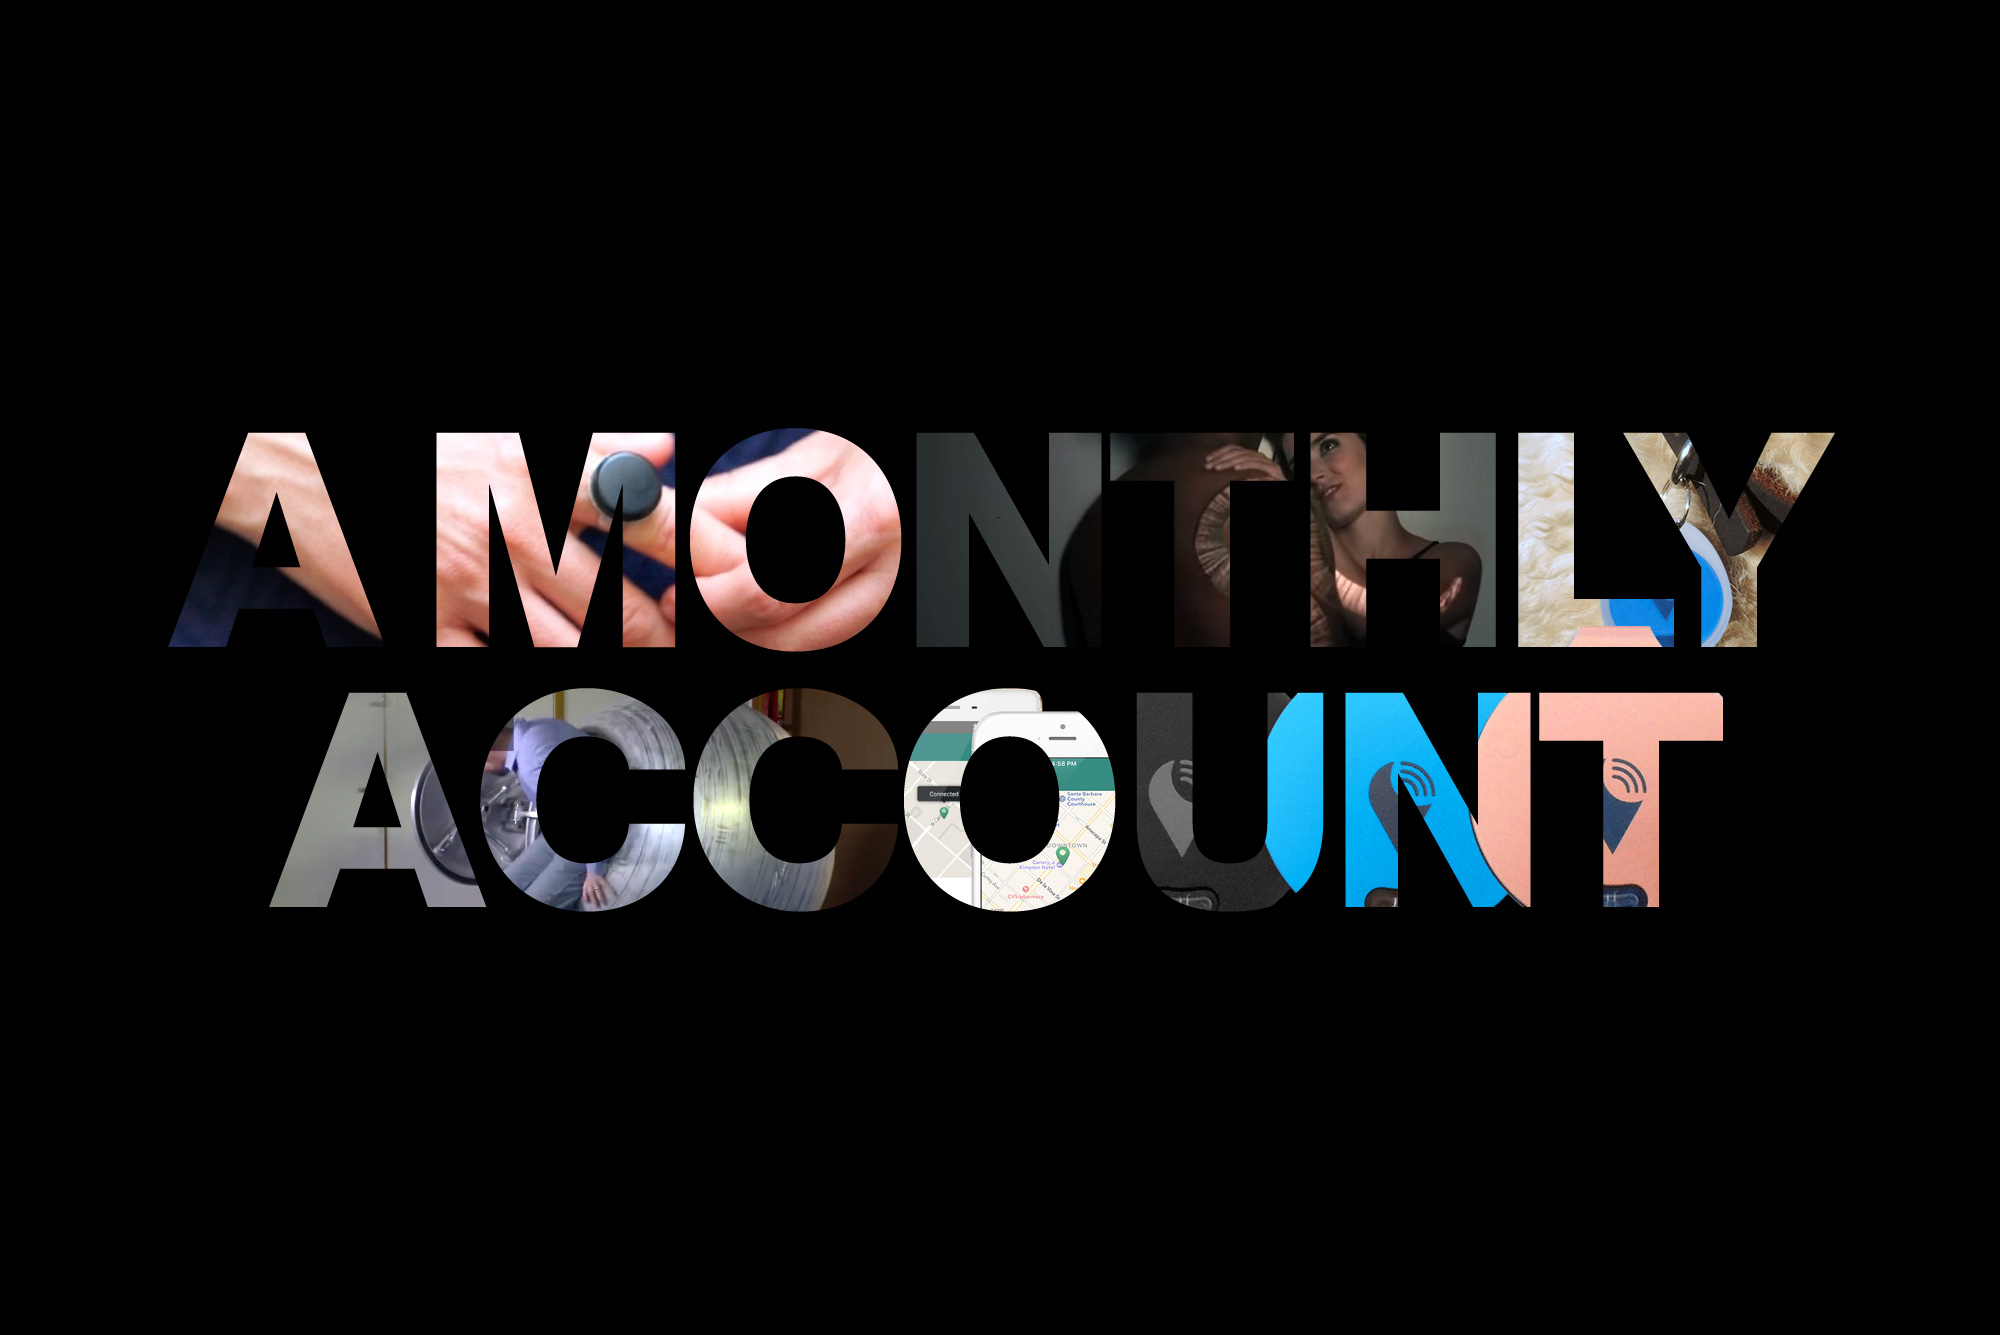 A Monthly Account image with various images in the lettering